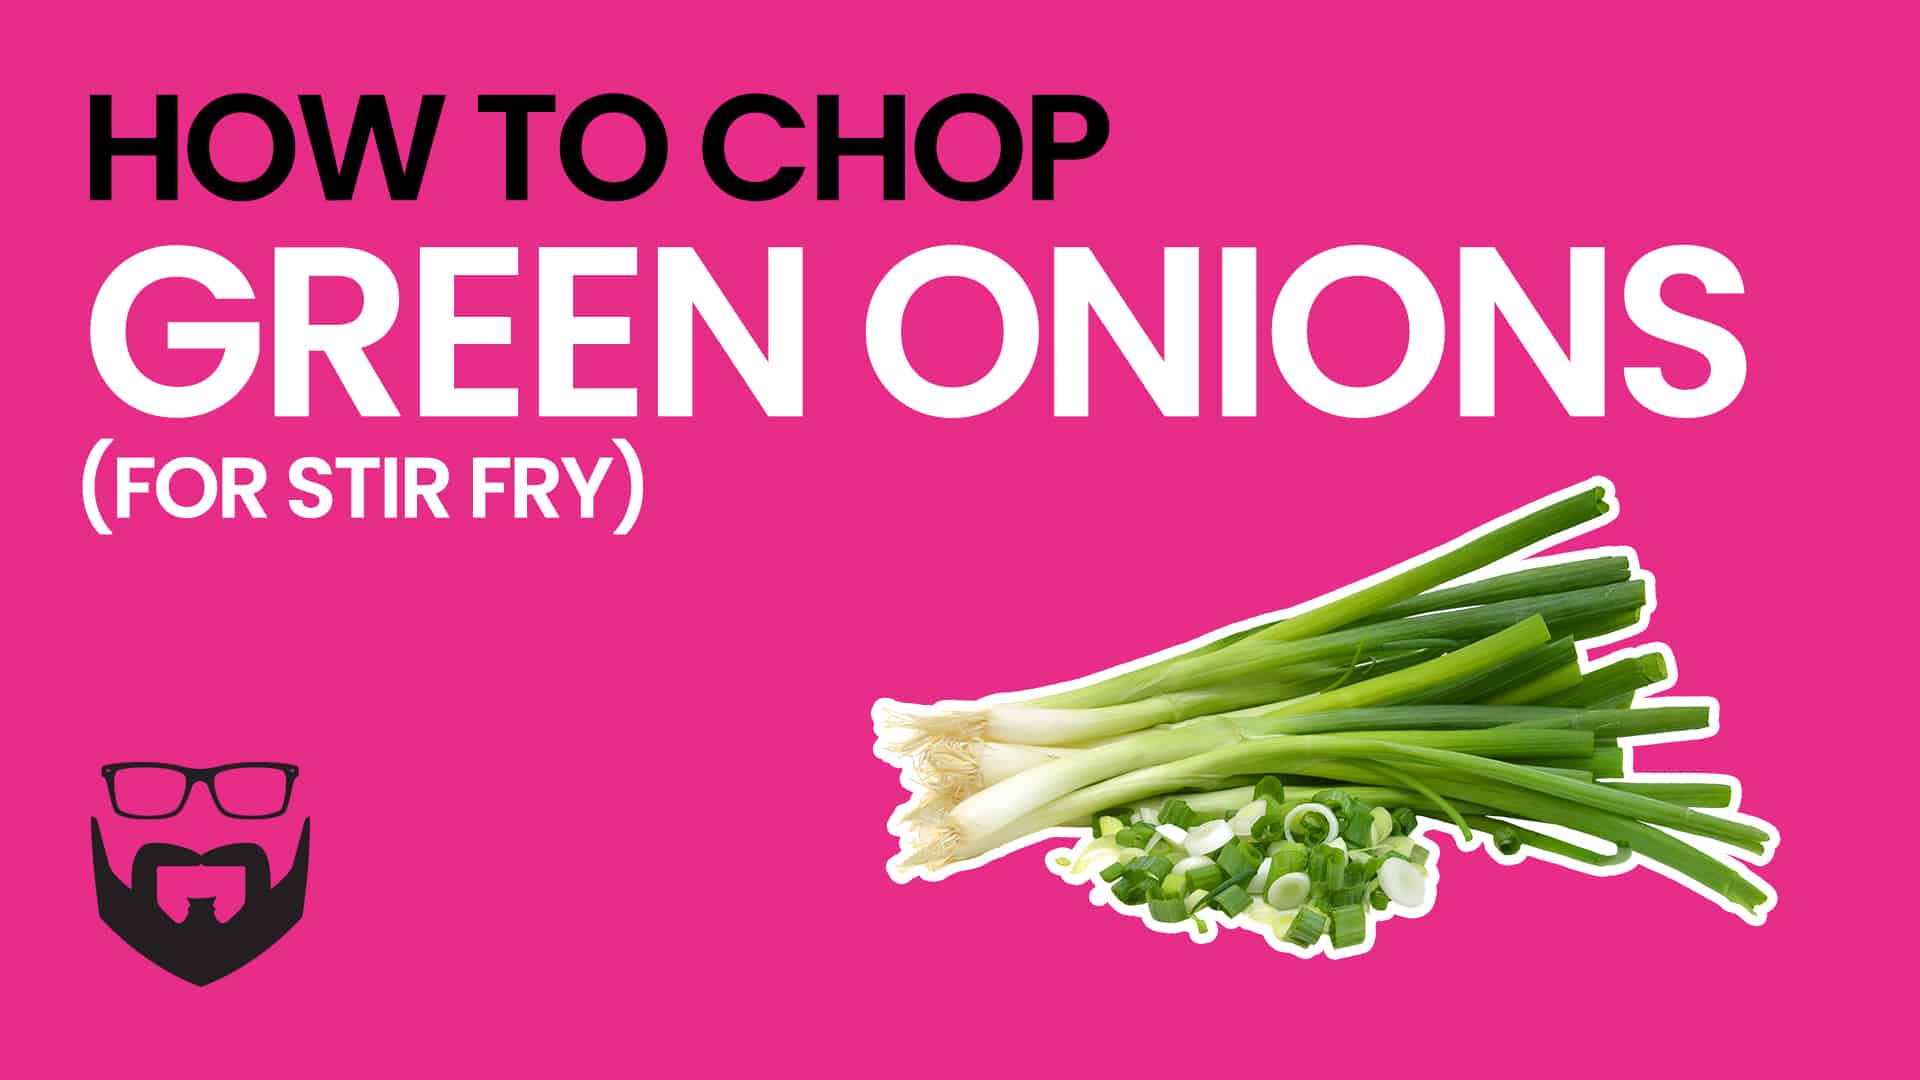 https://jerryjamesstone.com/wp-content/uploads/2019/12/How-to-Chop-Green-Onions-for-Stir-Fry-Video-Pink.jpg